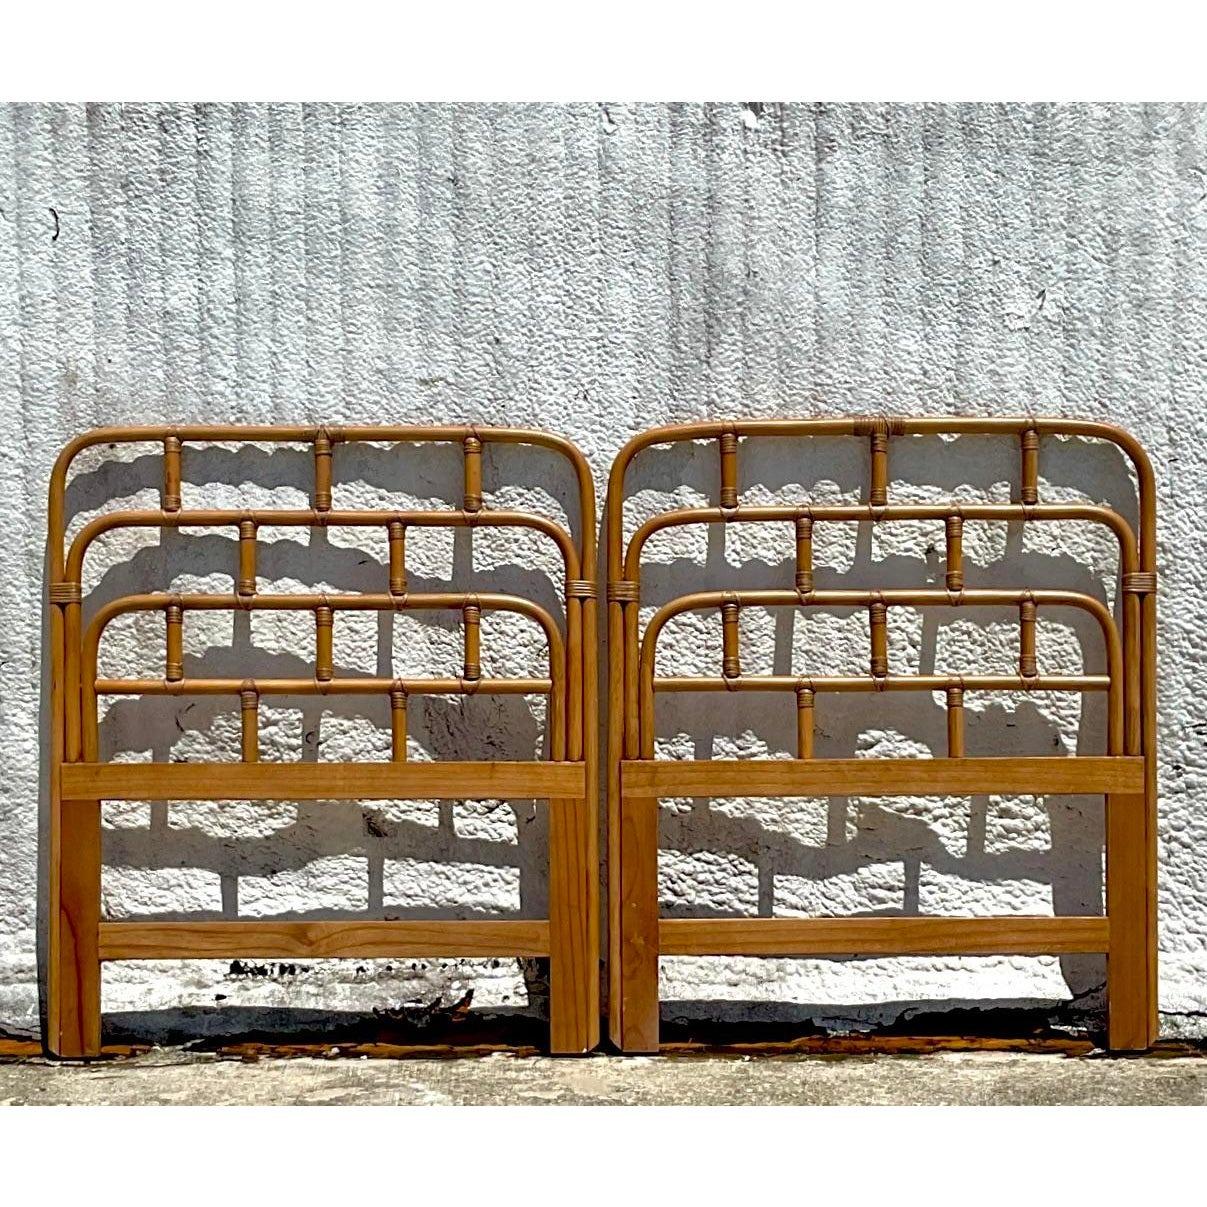 A fabulous pair of vintage Coastal Twin headboards. Chic bent rattan with wrapped rattan joints. Acquired from a Palm Beach estate